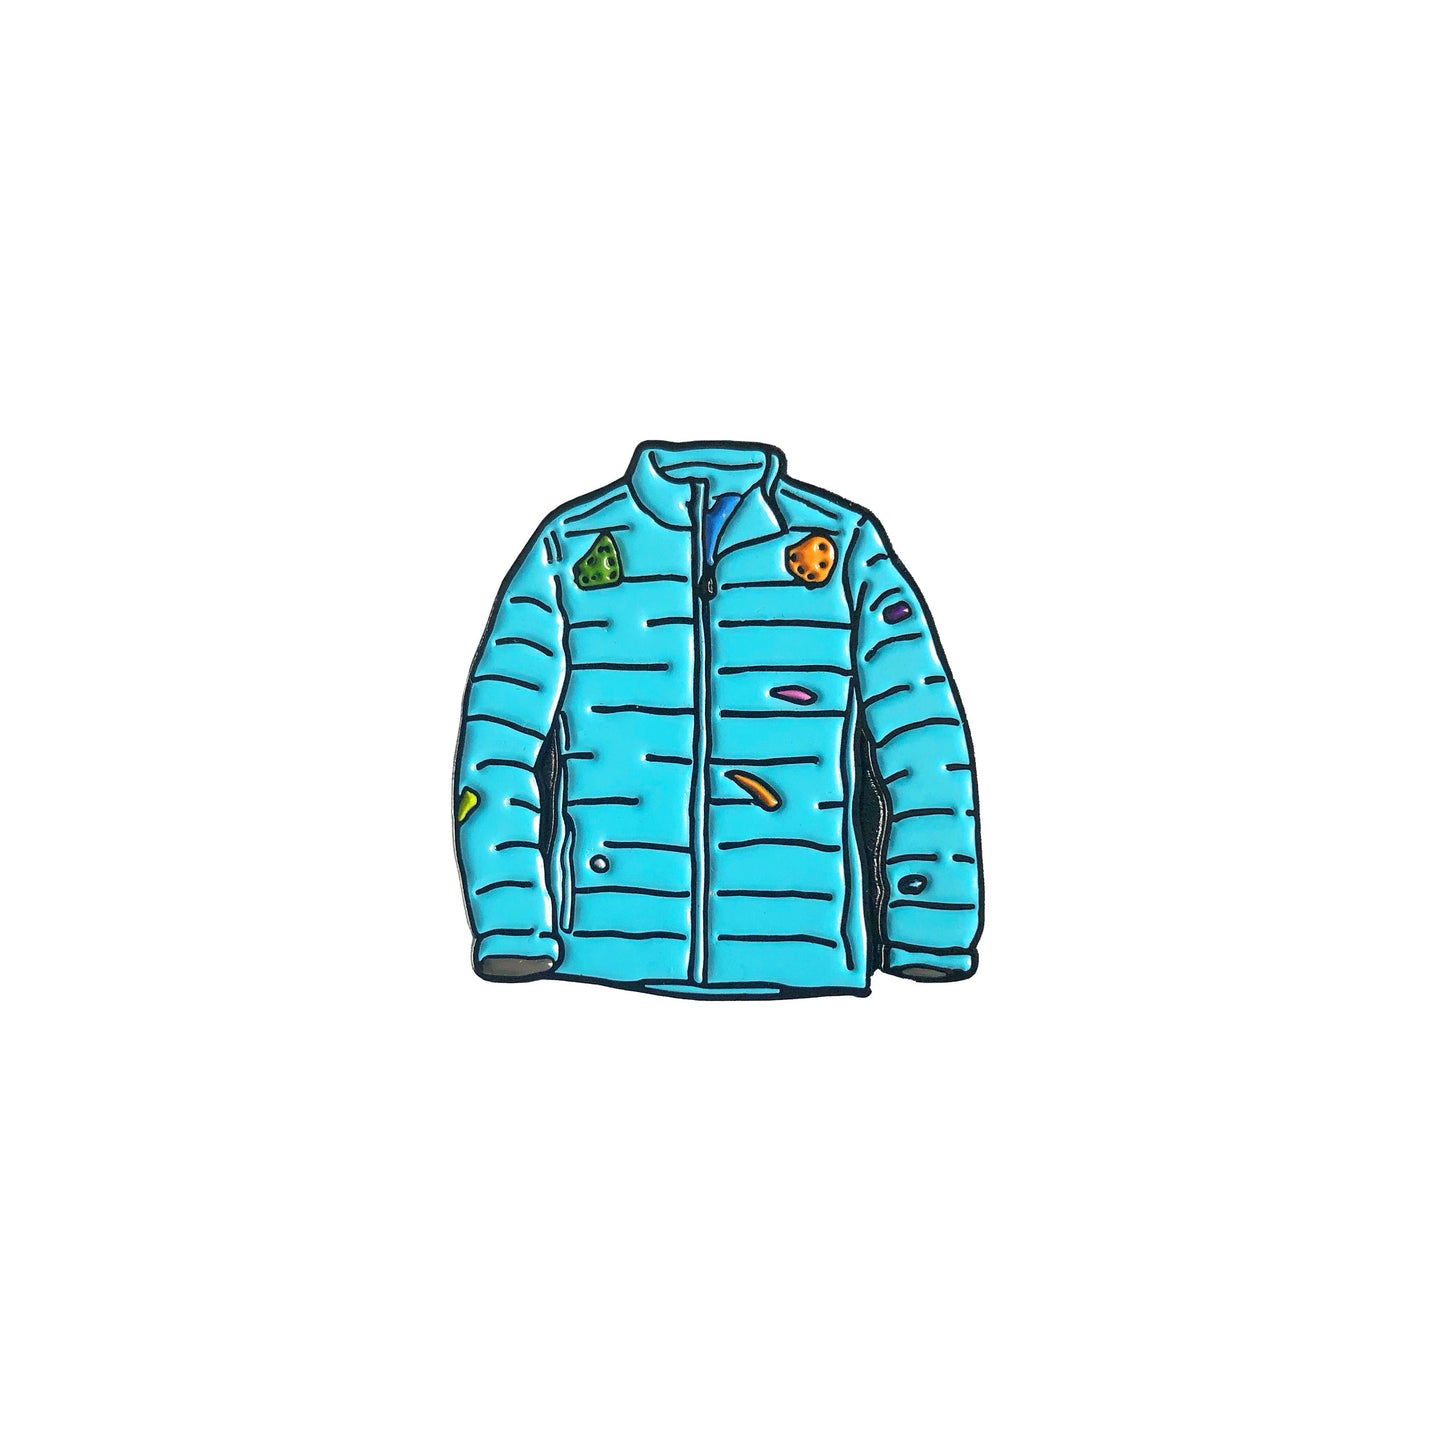 Enamel pin in the shape of a puffy jacket 